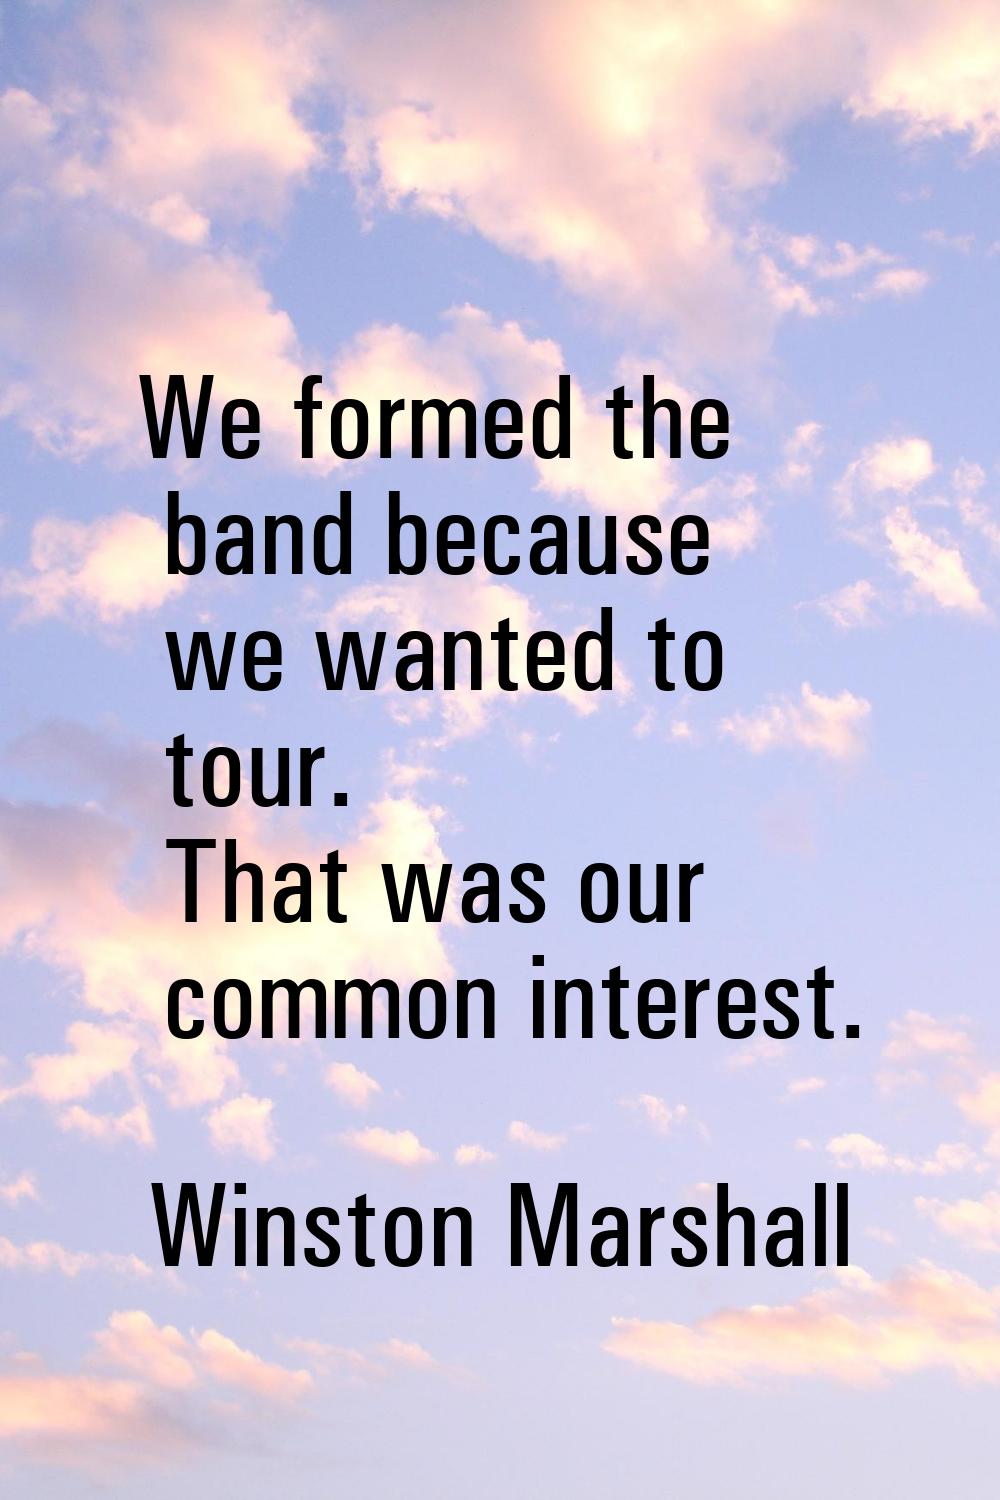 We formed the band because we wanted to tour. That was our common interest.